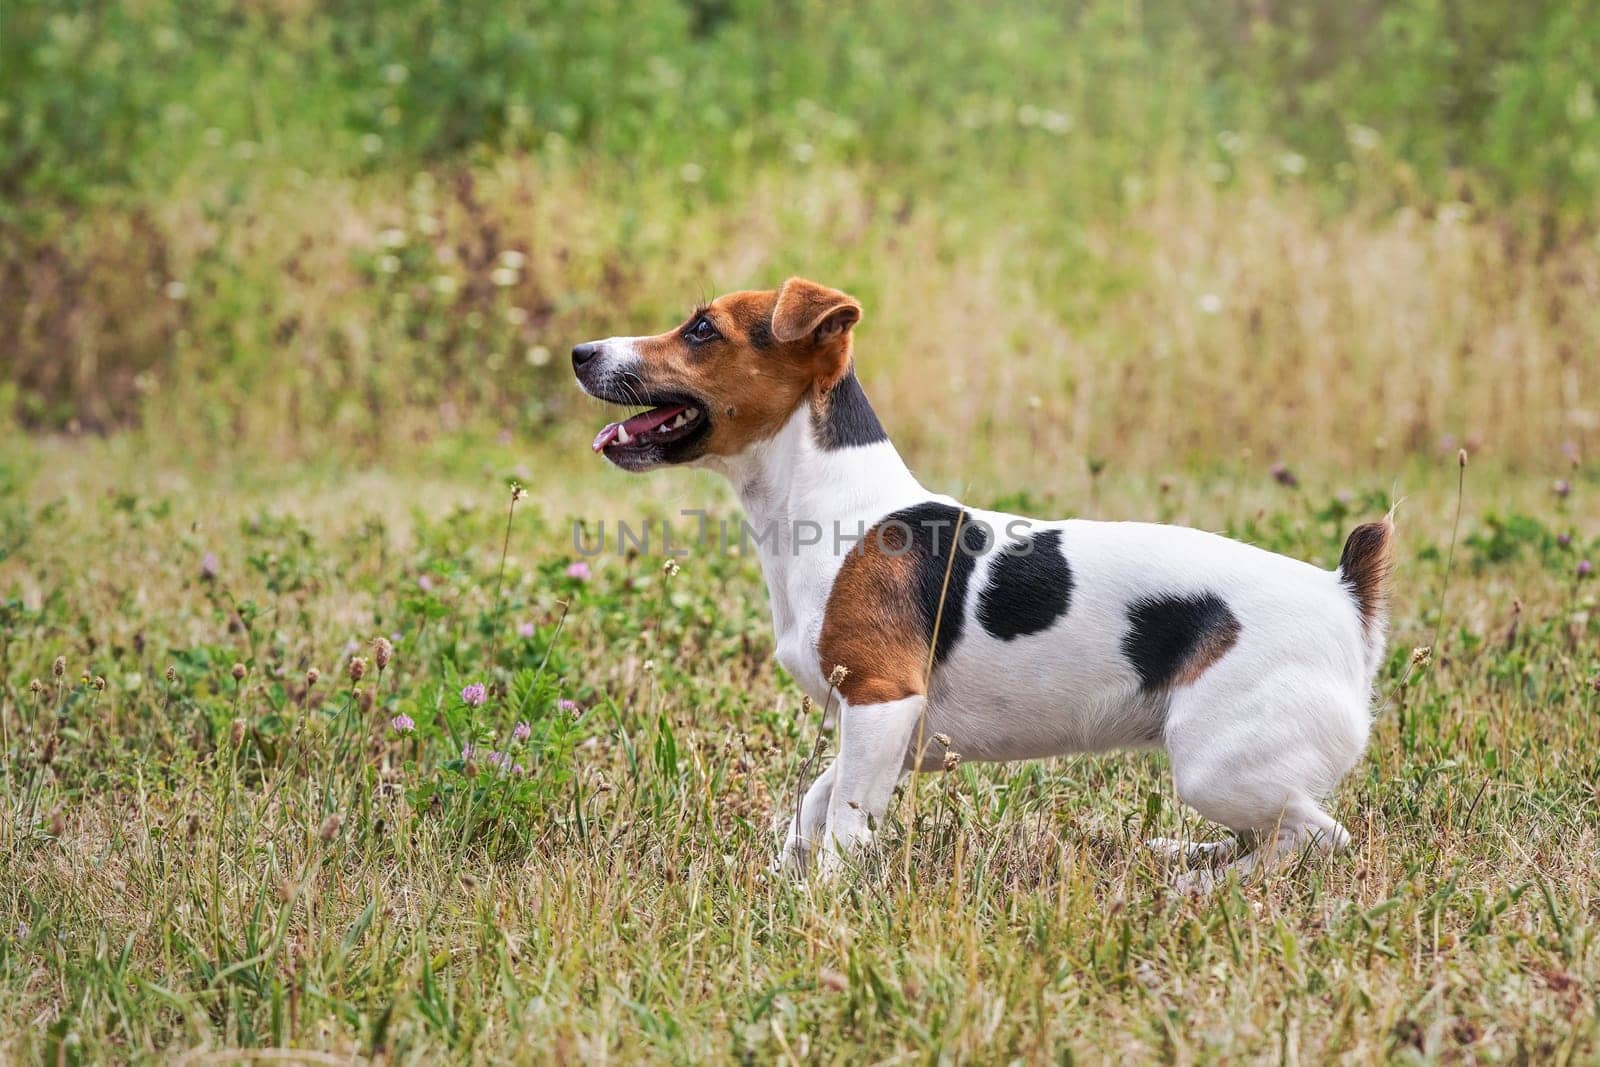 Jack Russell terrier dog on meadow, her mouth opened with tongue out, view from side